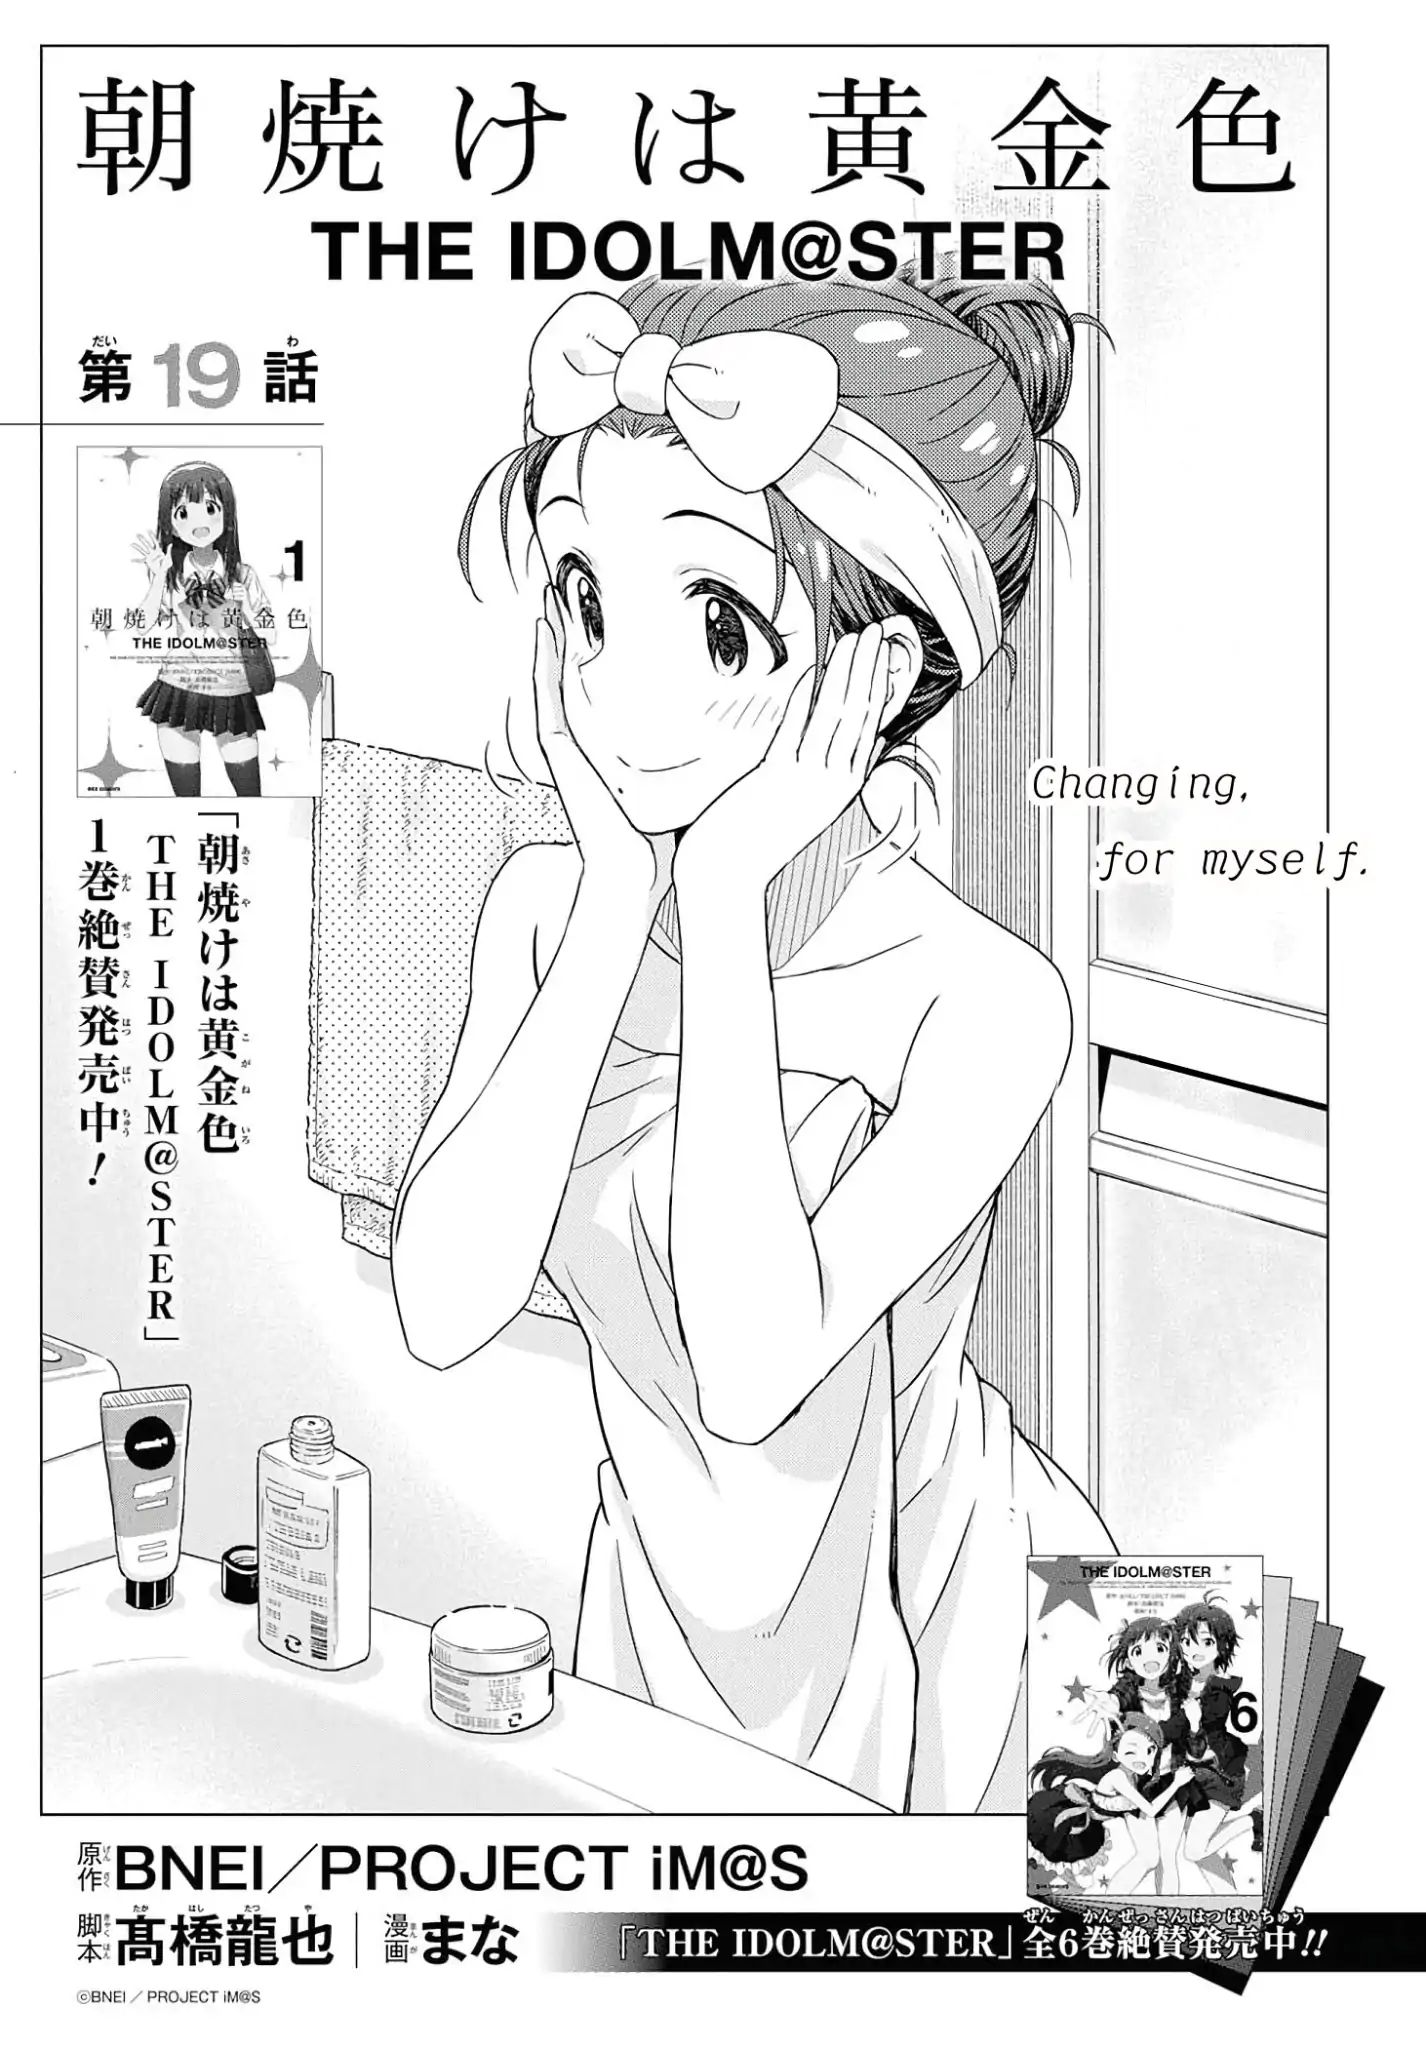 The Idolm@ster: Asayake Wa Koganeiro Vol.1 Chapter 19: Changing For Myself - Picture 1